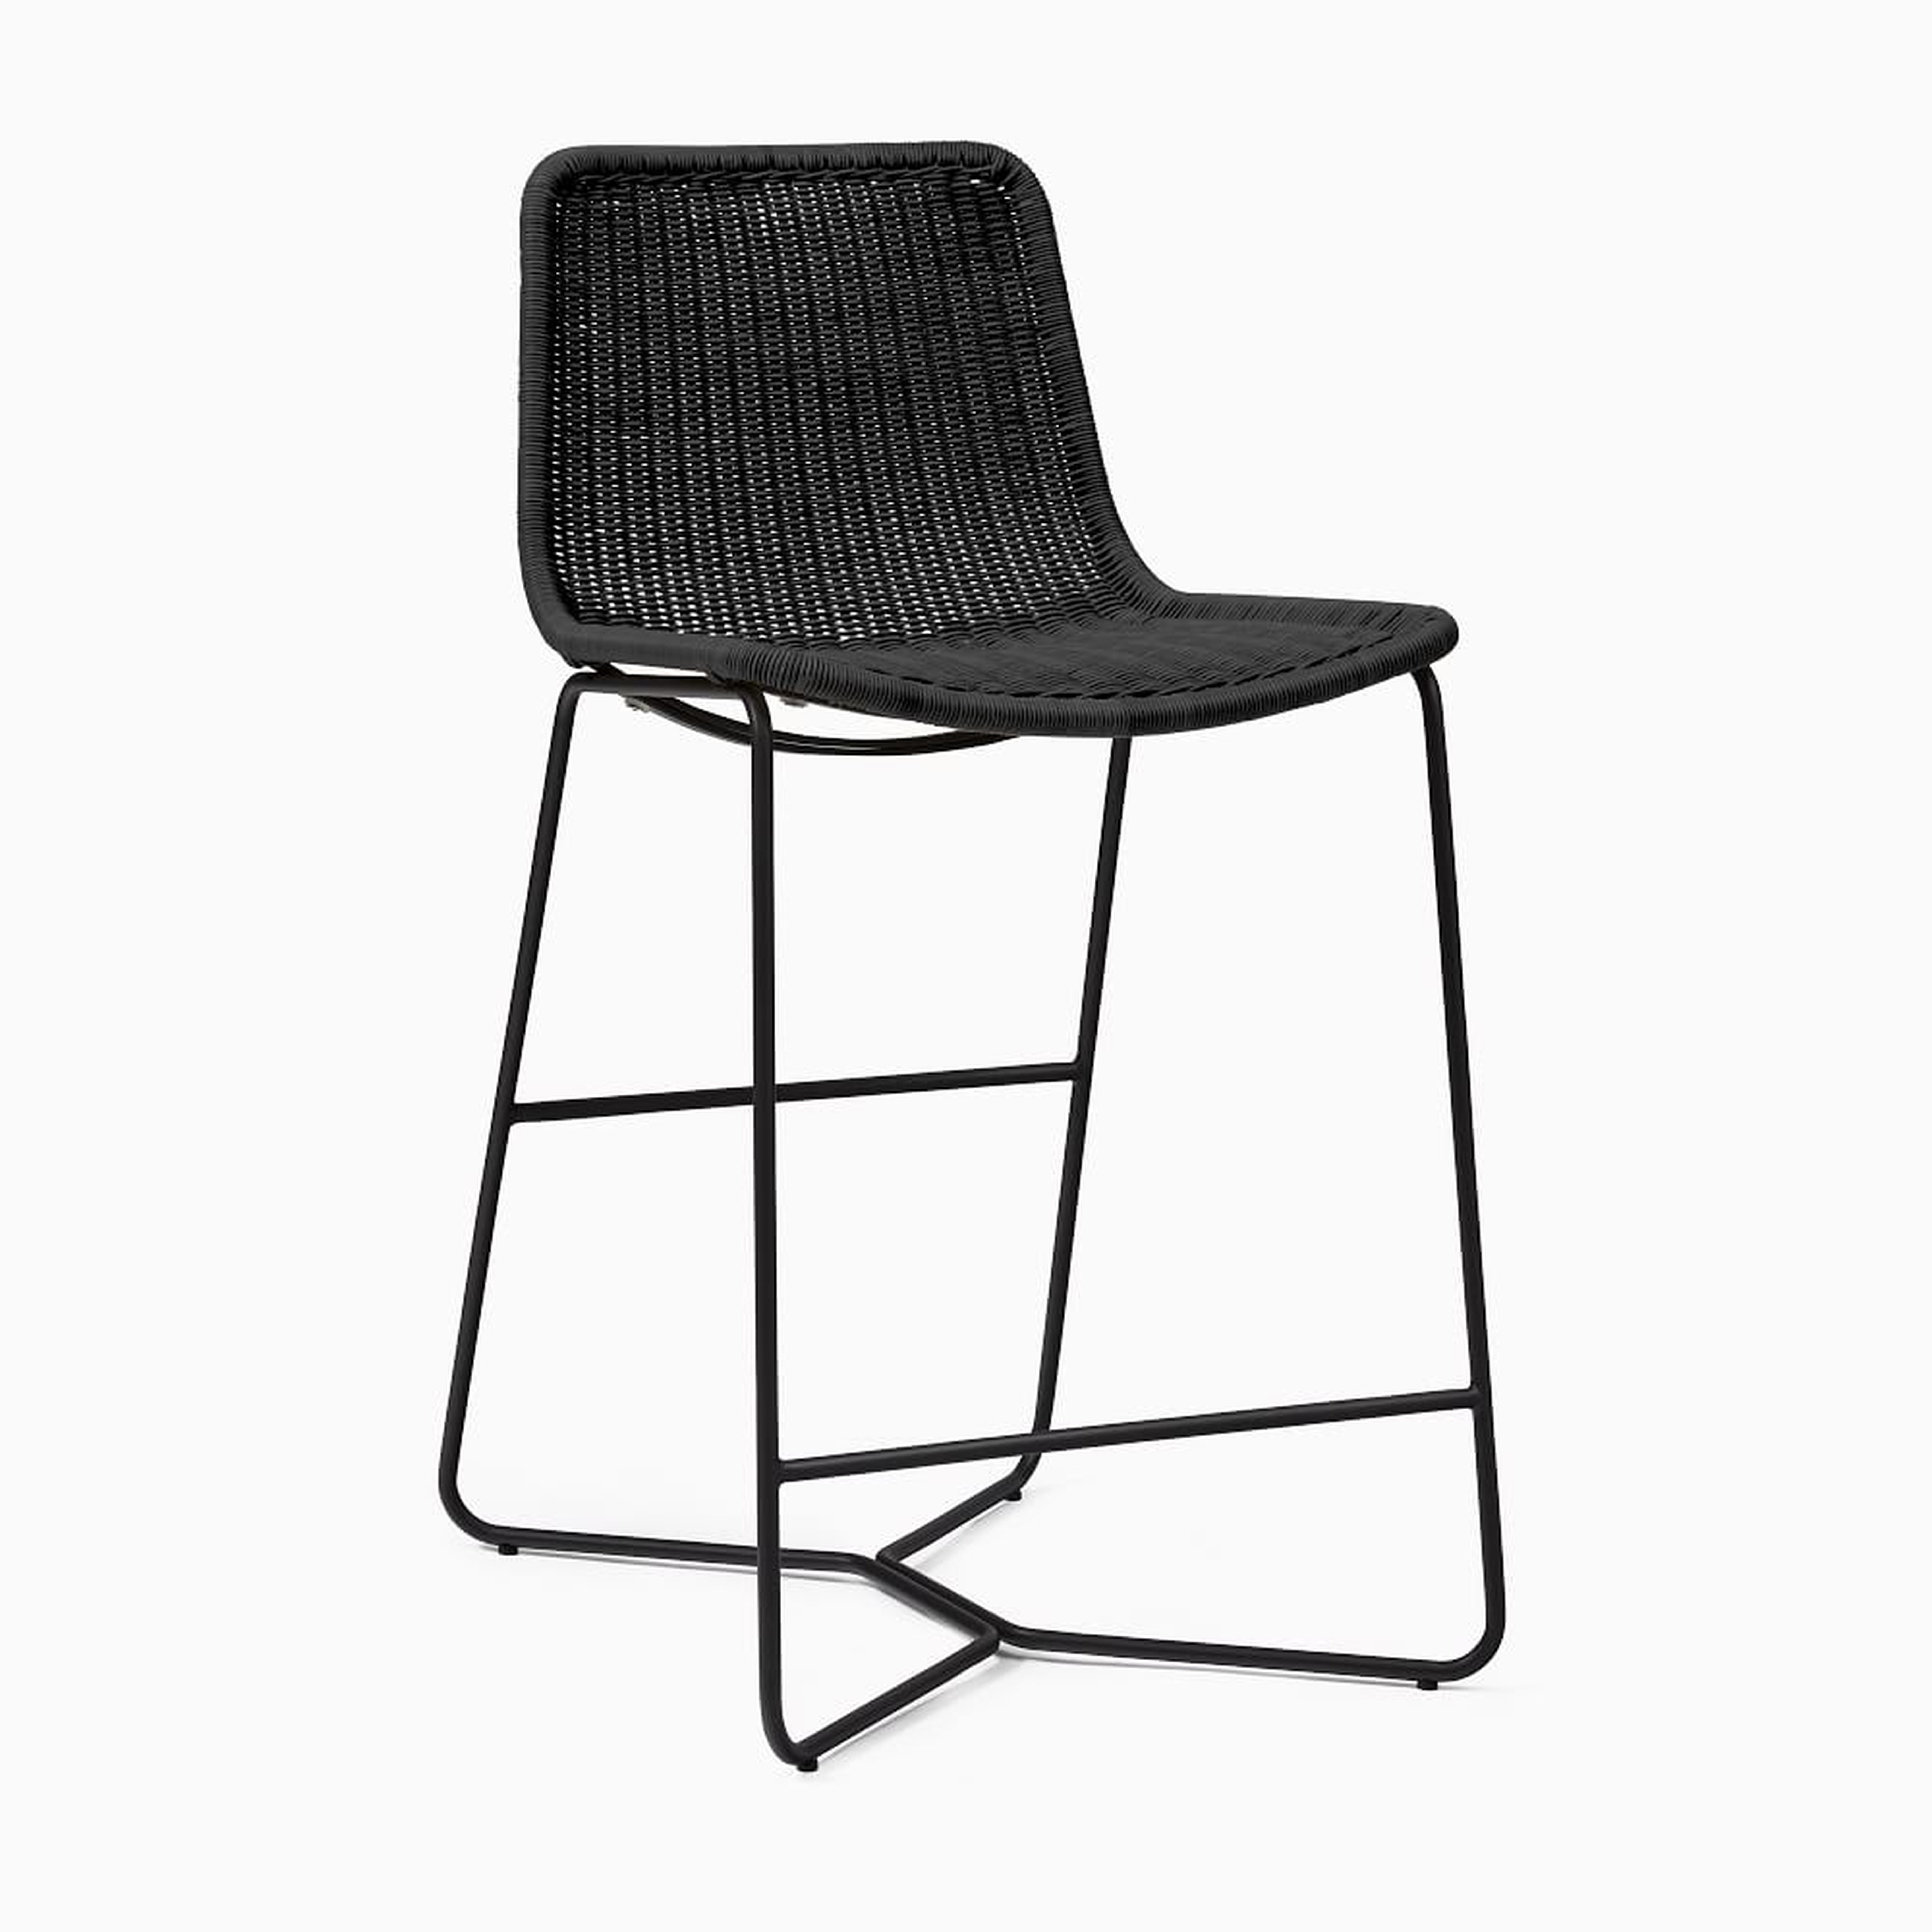 Slope Outdoor Counter Stool, All Weather Wicker, Charcoal - West Elm